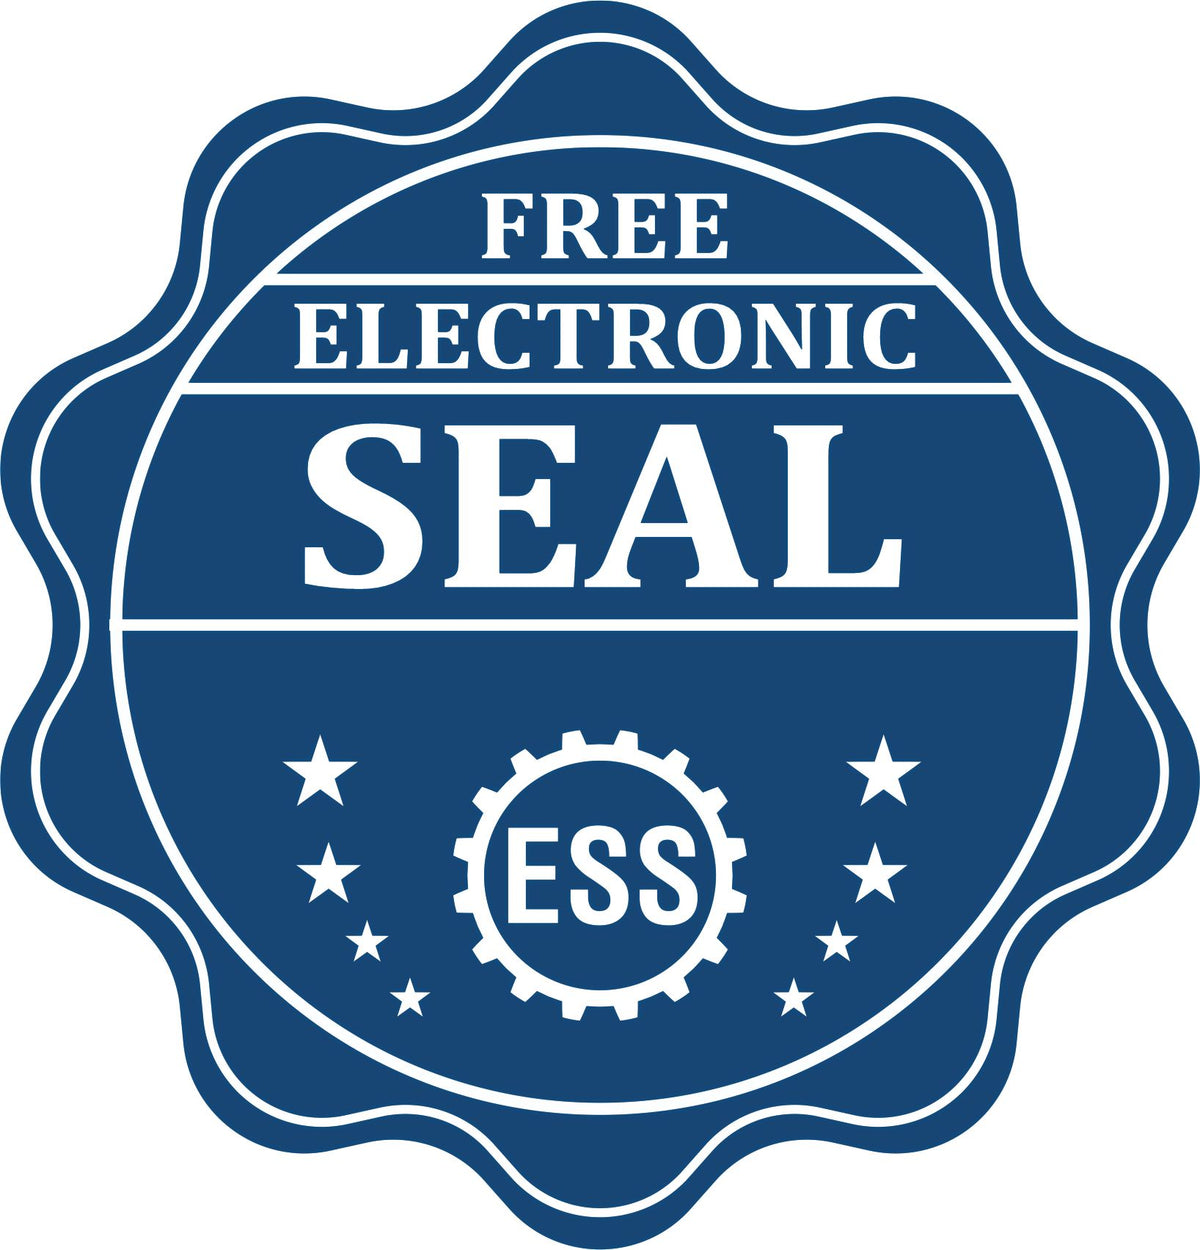 A badge showing a free electronic seal for the Handheld New York Professional Engineer Embosser with stars and the ESS gear on the emblem.